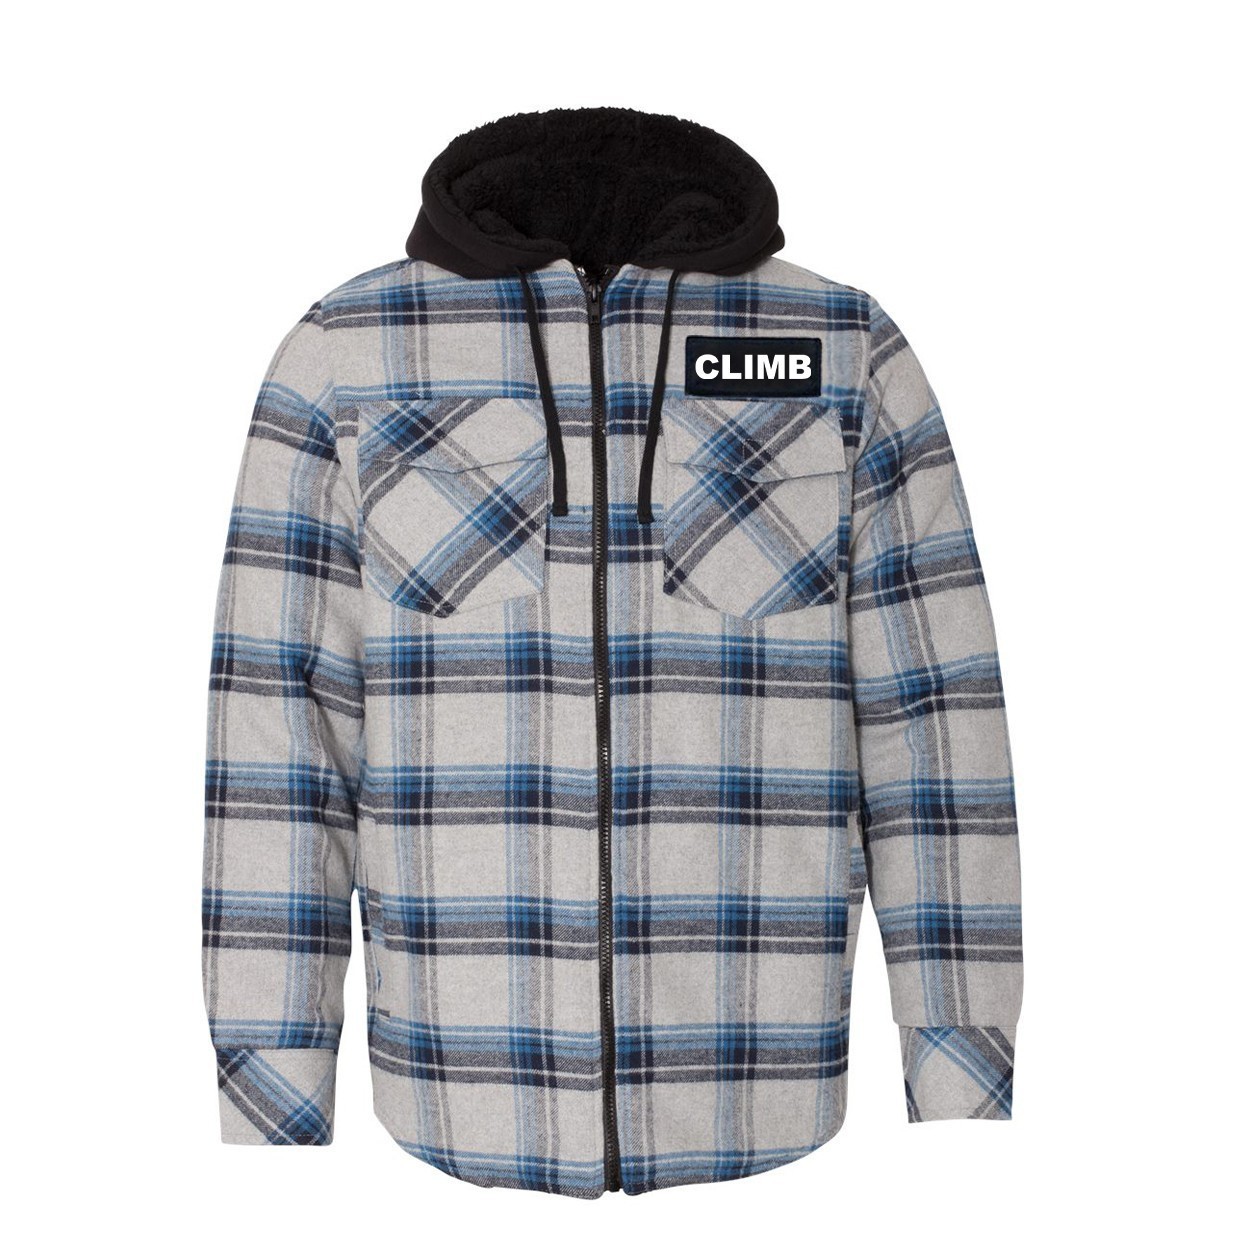 Climb Brand Logo Classic Unisex Full Zip Woven Patch Hooded Flannel Jacket Gray/ Blue (White Logo)